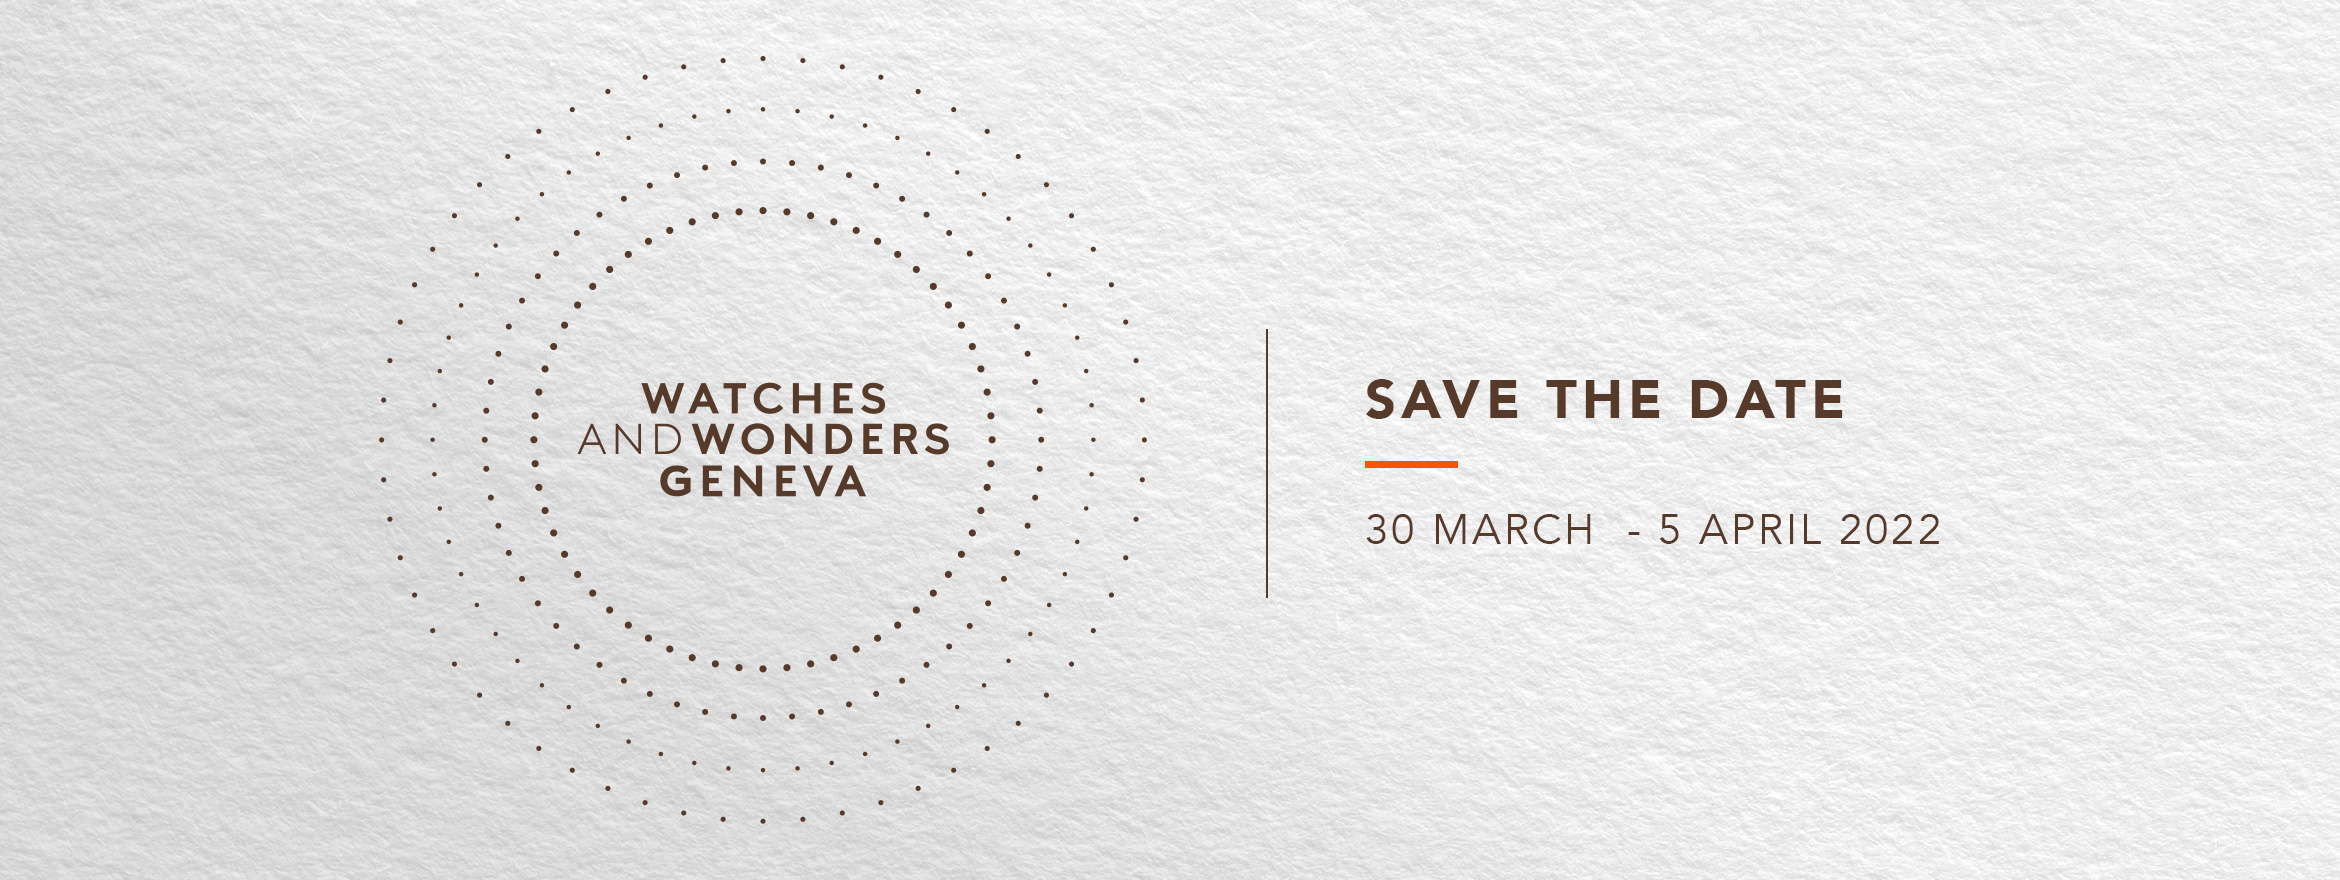 Save the Date: Watches and Wonders 2022